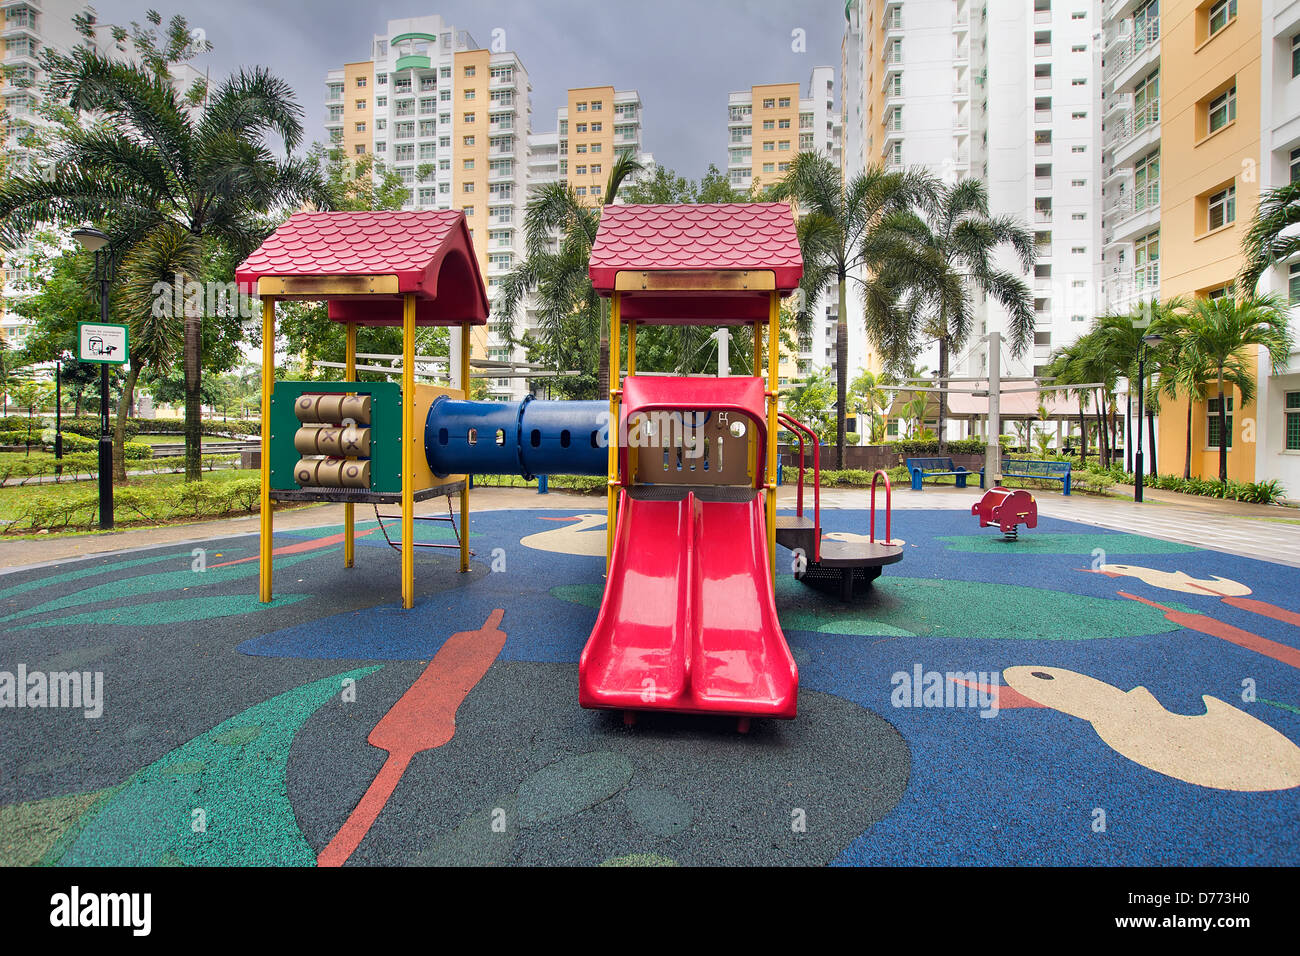 Rubber Ducky Theme Children Playground with Red Slides in Public Housing in Singapore Punggol District Stock Photo